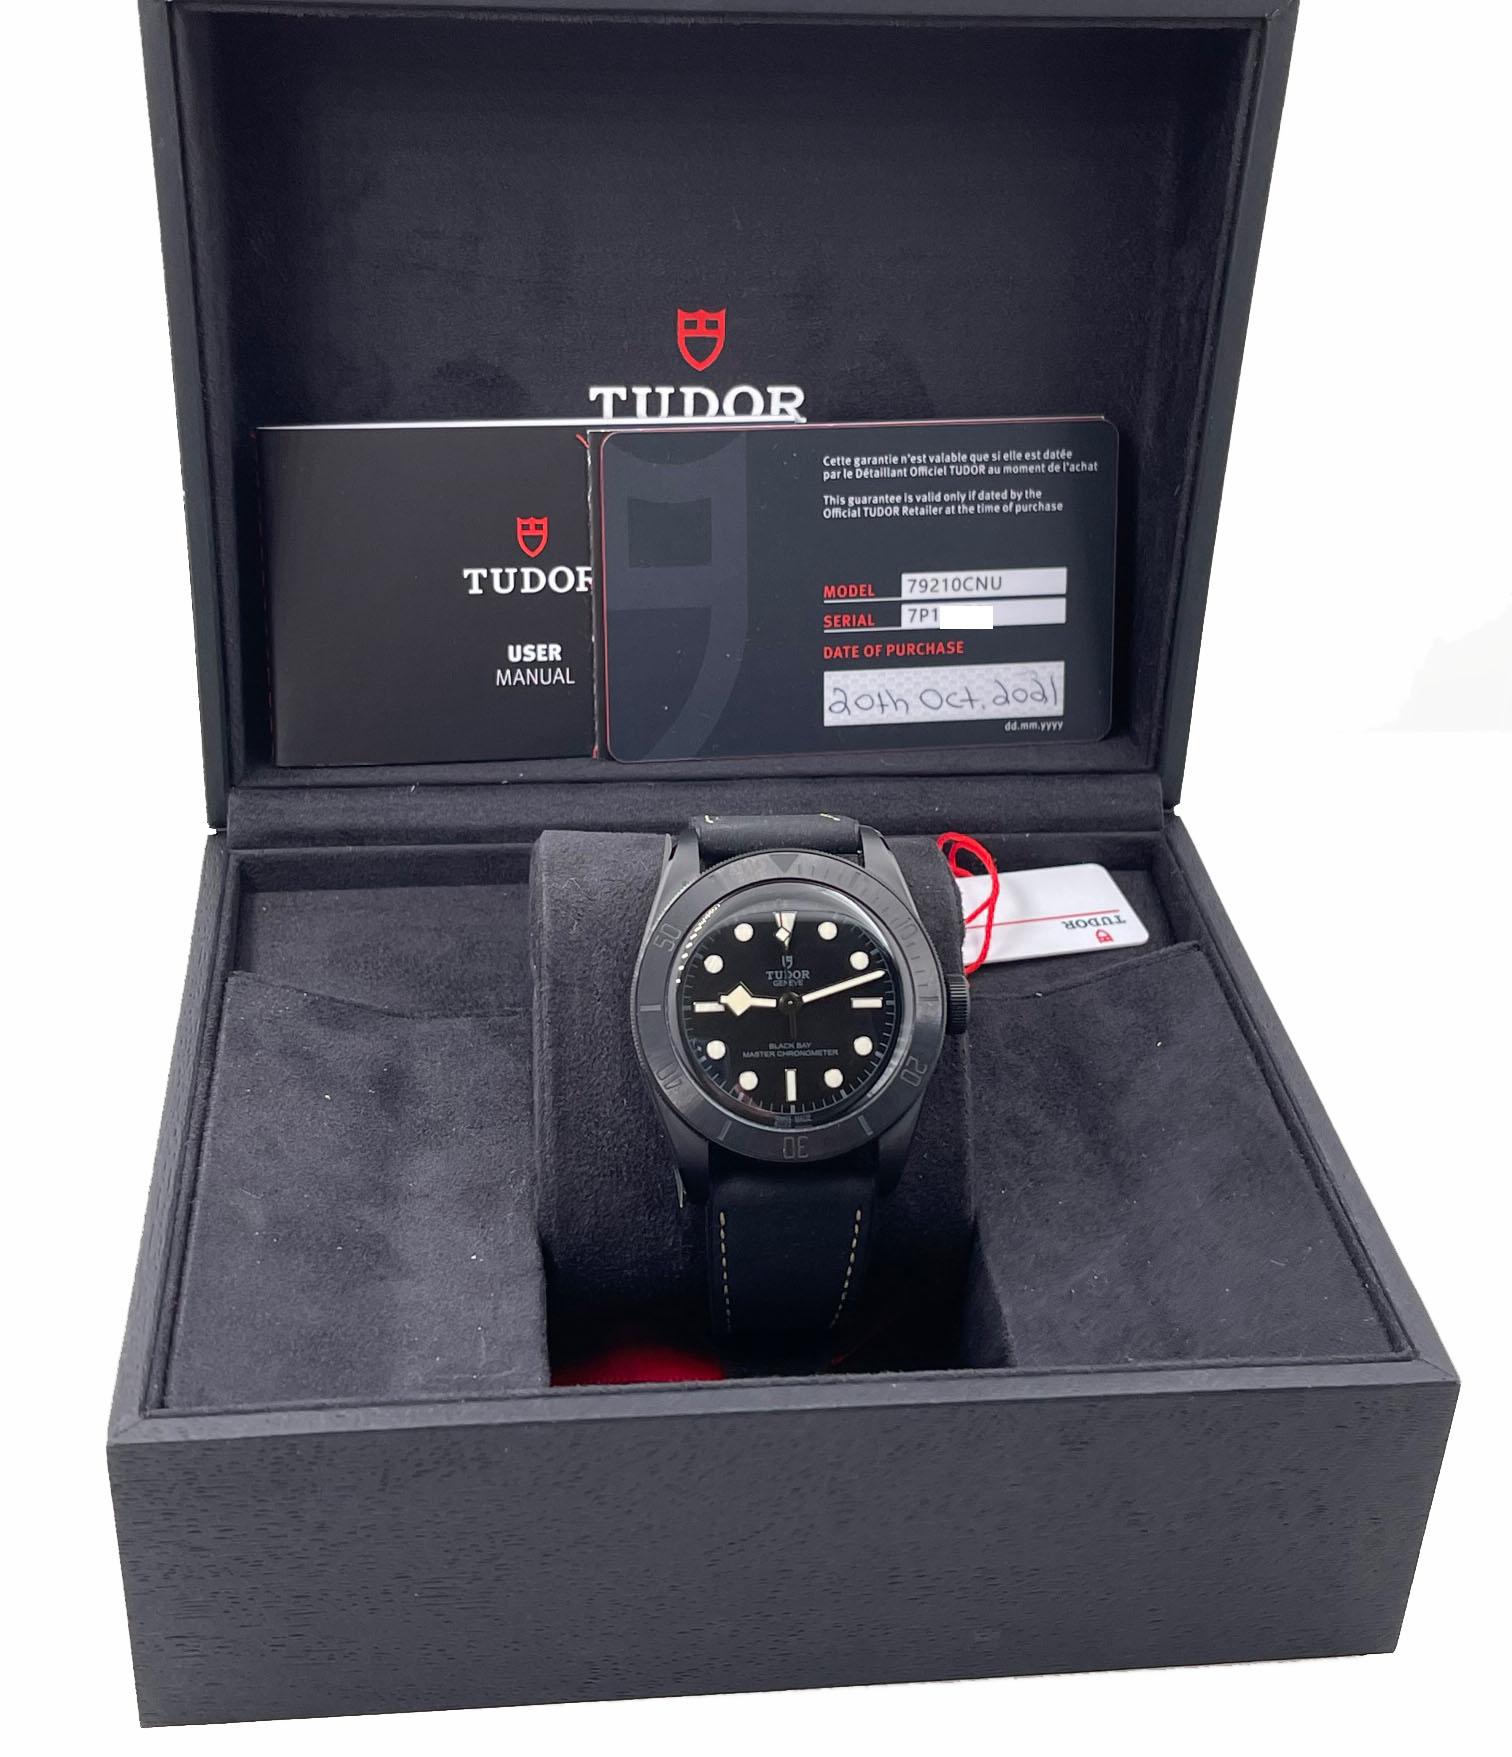 Style Number: 79210CNU

 

Serial: 7P12***


Year: 2021

 

Model: Black Bay

 

Case Material: Black Ceramic

 

Band: Leather

 

Bezel: Black Ceramic

 

Dial: Black

 

Face: Sapphire Crystal

 

Case Size: 41mm

 

Includes: 

-Tudor Box &